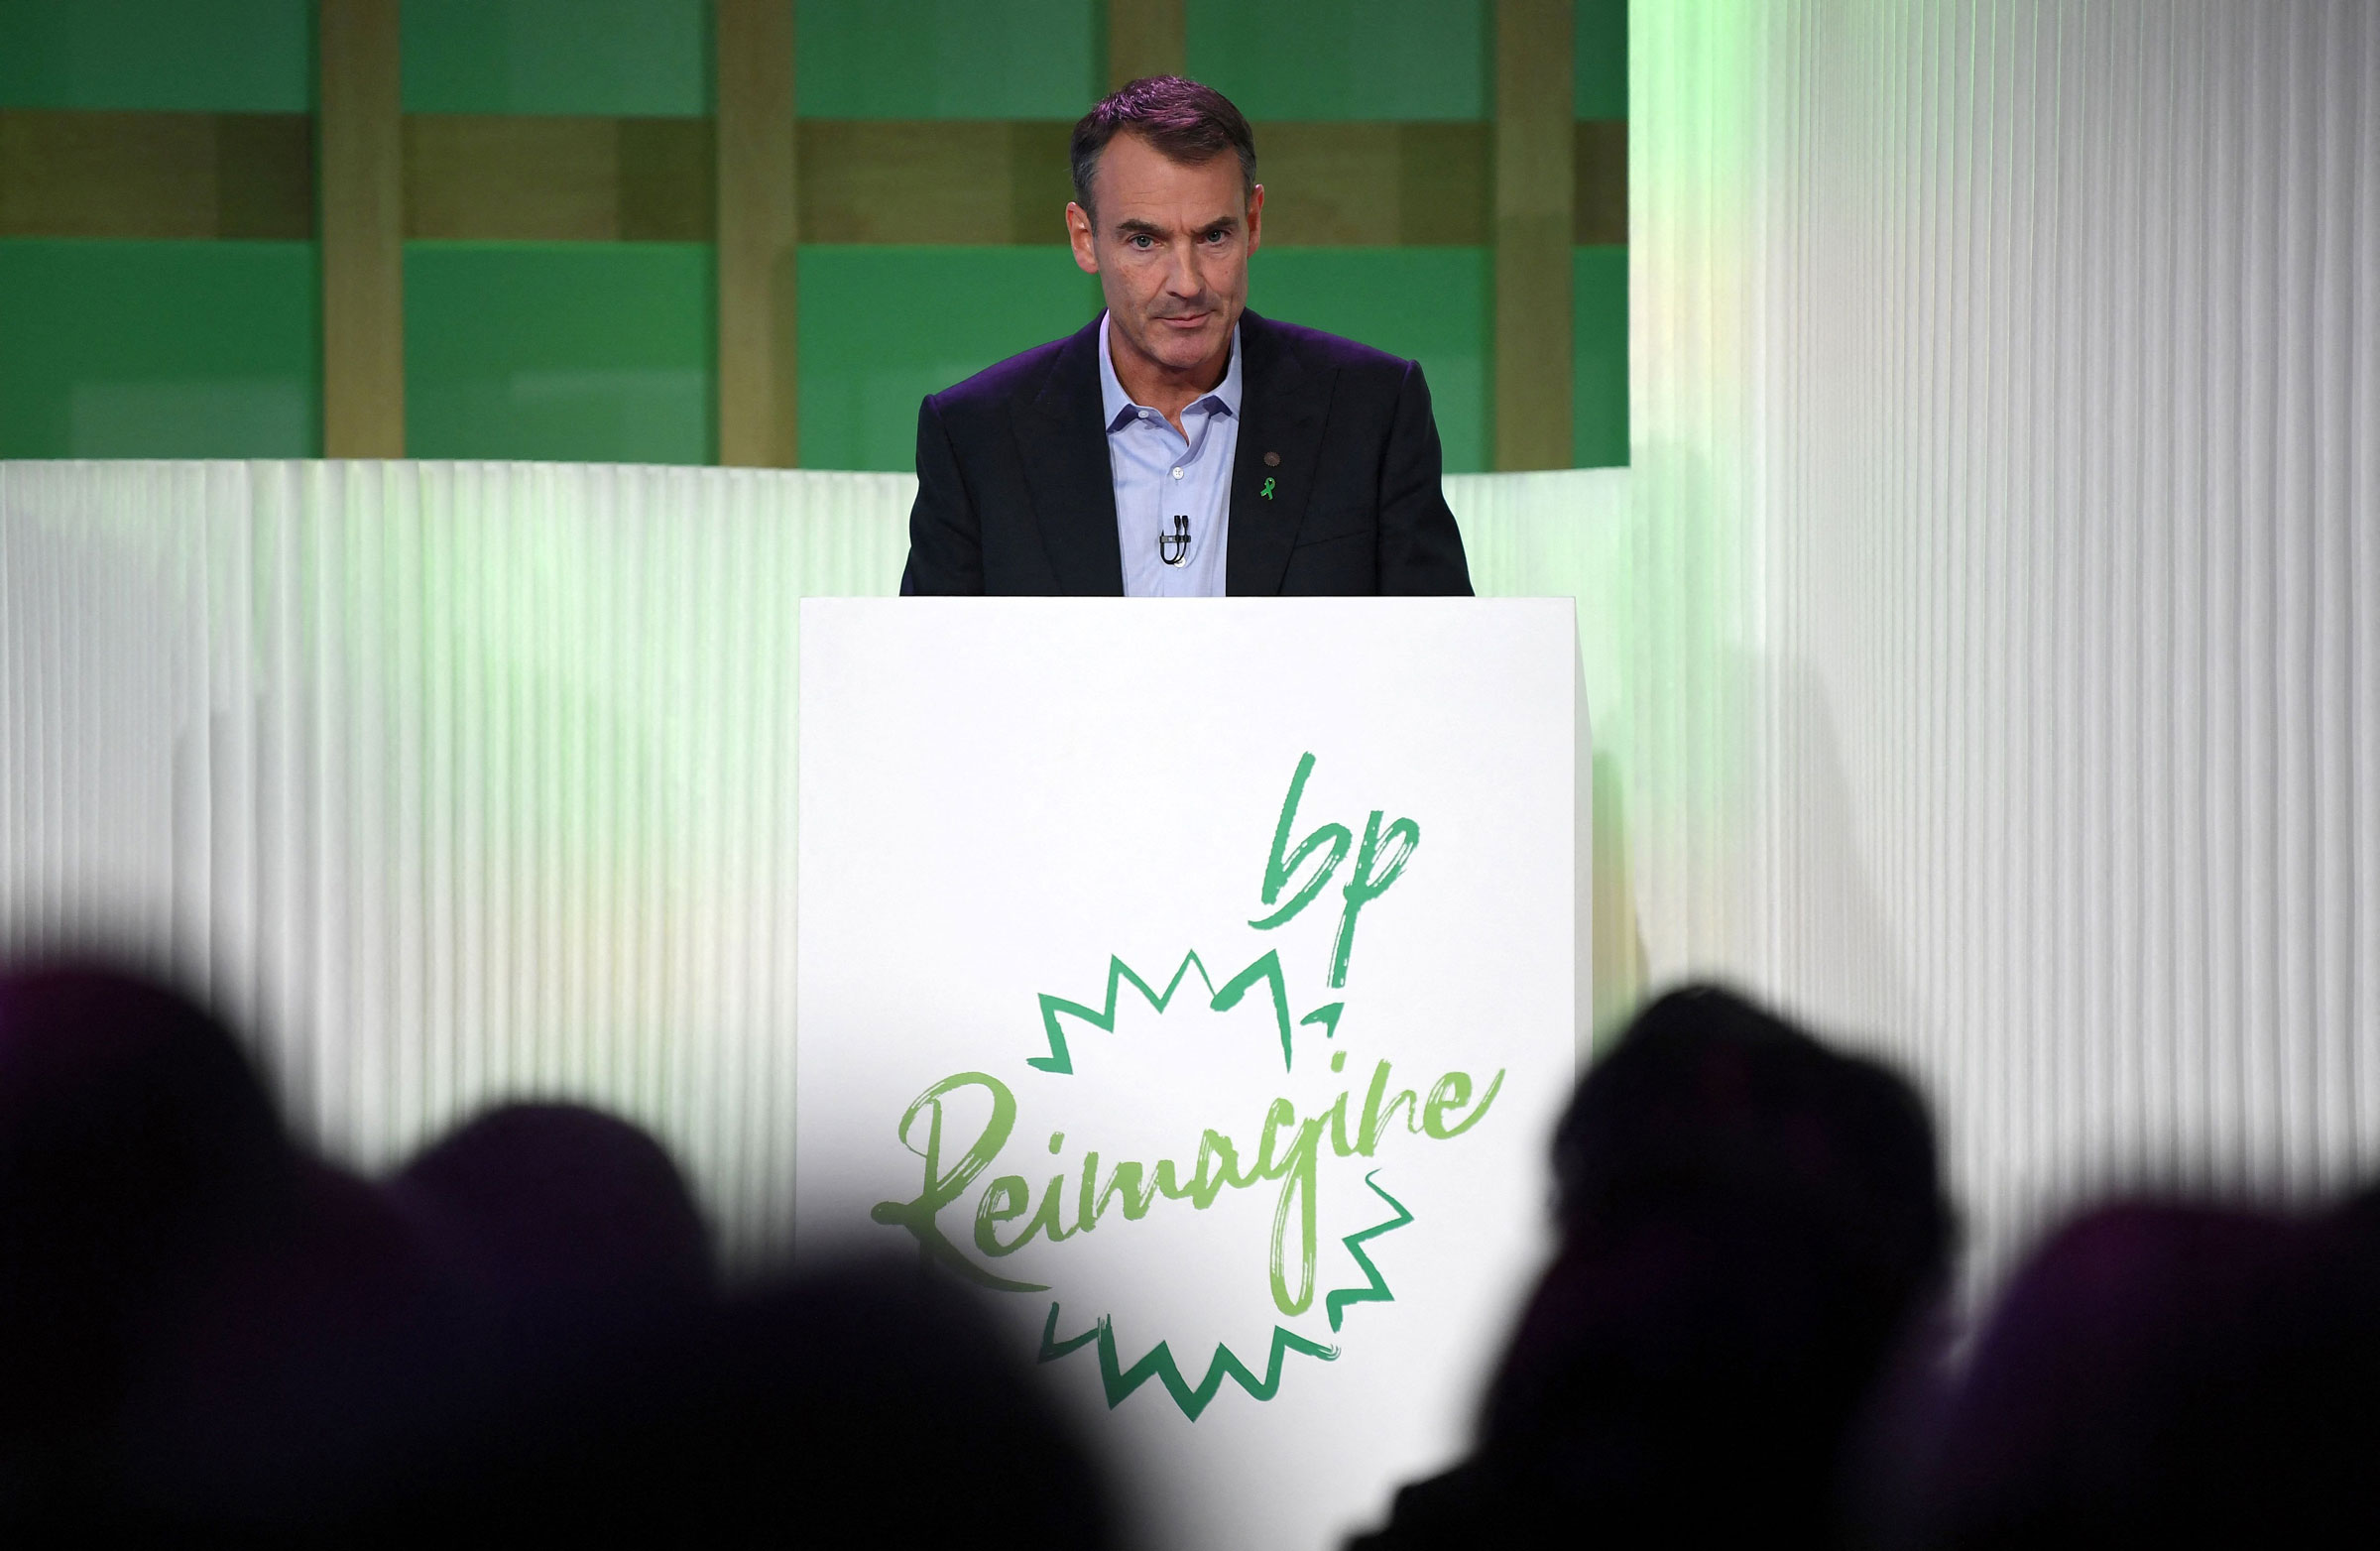 BP CEO Bernard Looney speaks during an event in London on Feb. 12, 2020, where he declared the company's intentions to achieve “net zero” carbon emissions by 2050. (Daniel Leal—AFP/Getty Images)